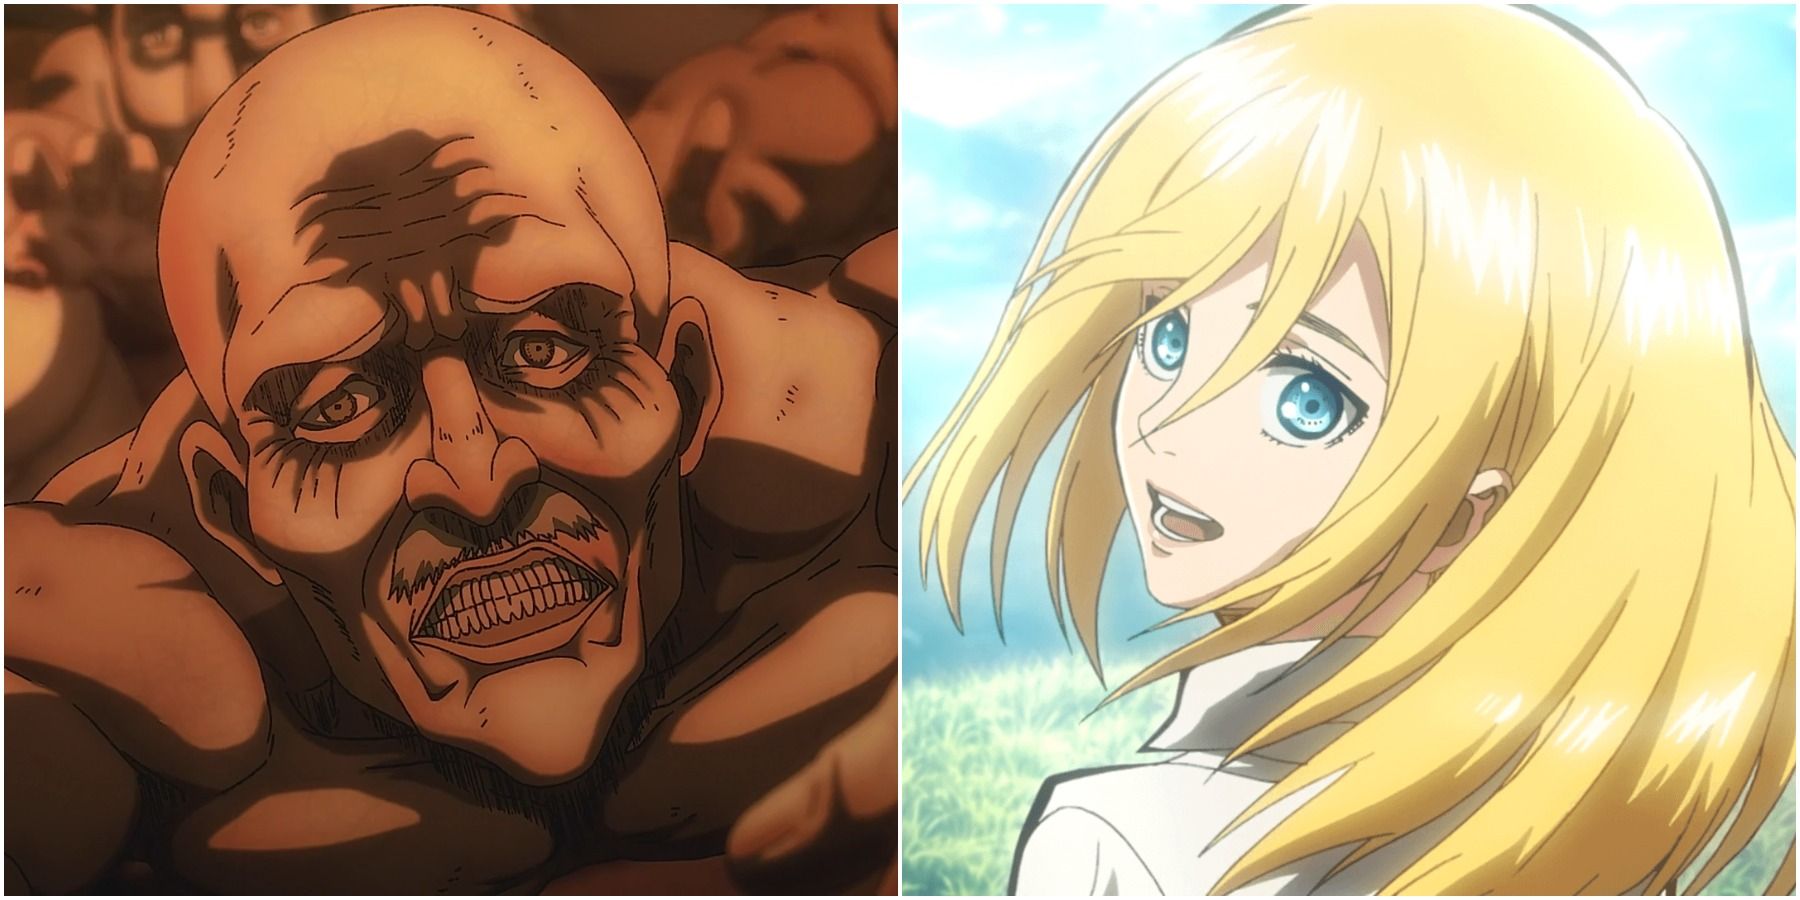 Suicide Squad anime movie from Attack on Titan studio looks twisted -  Polygon